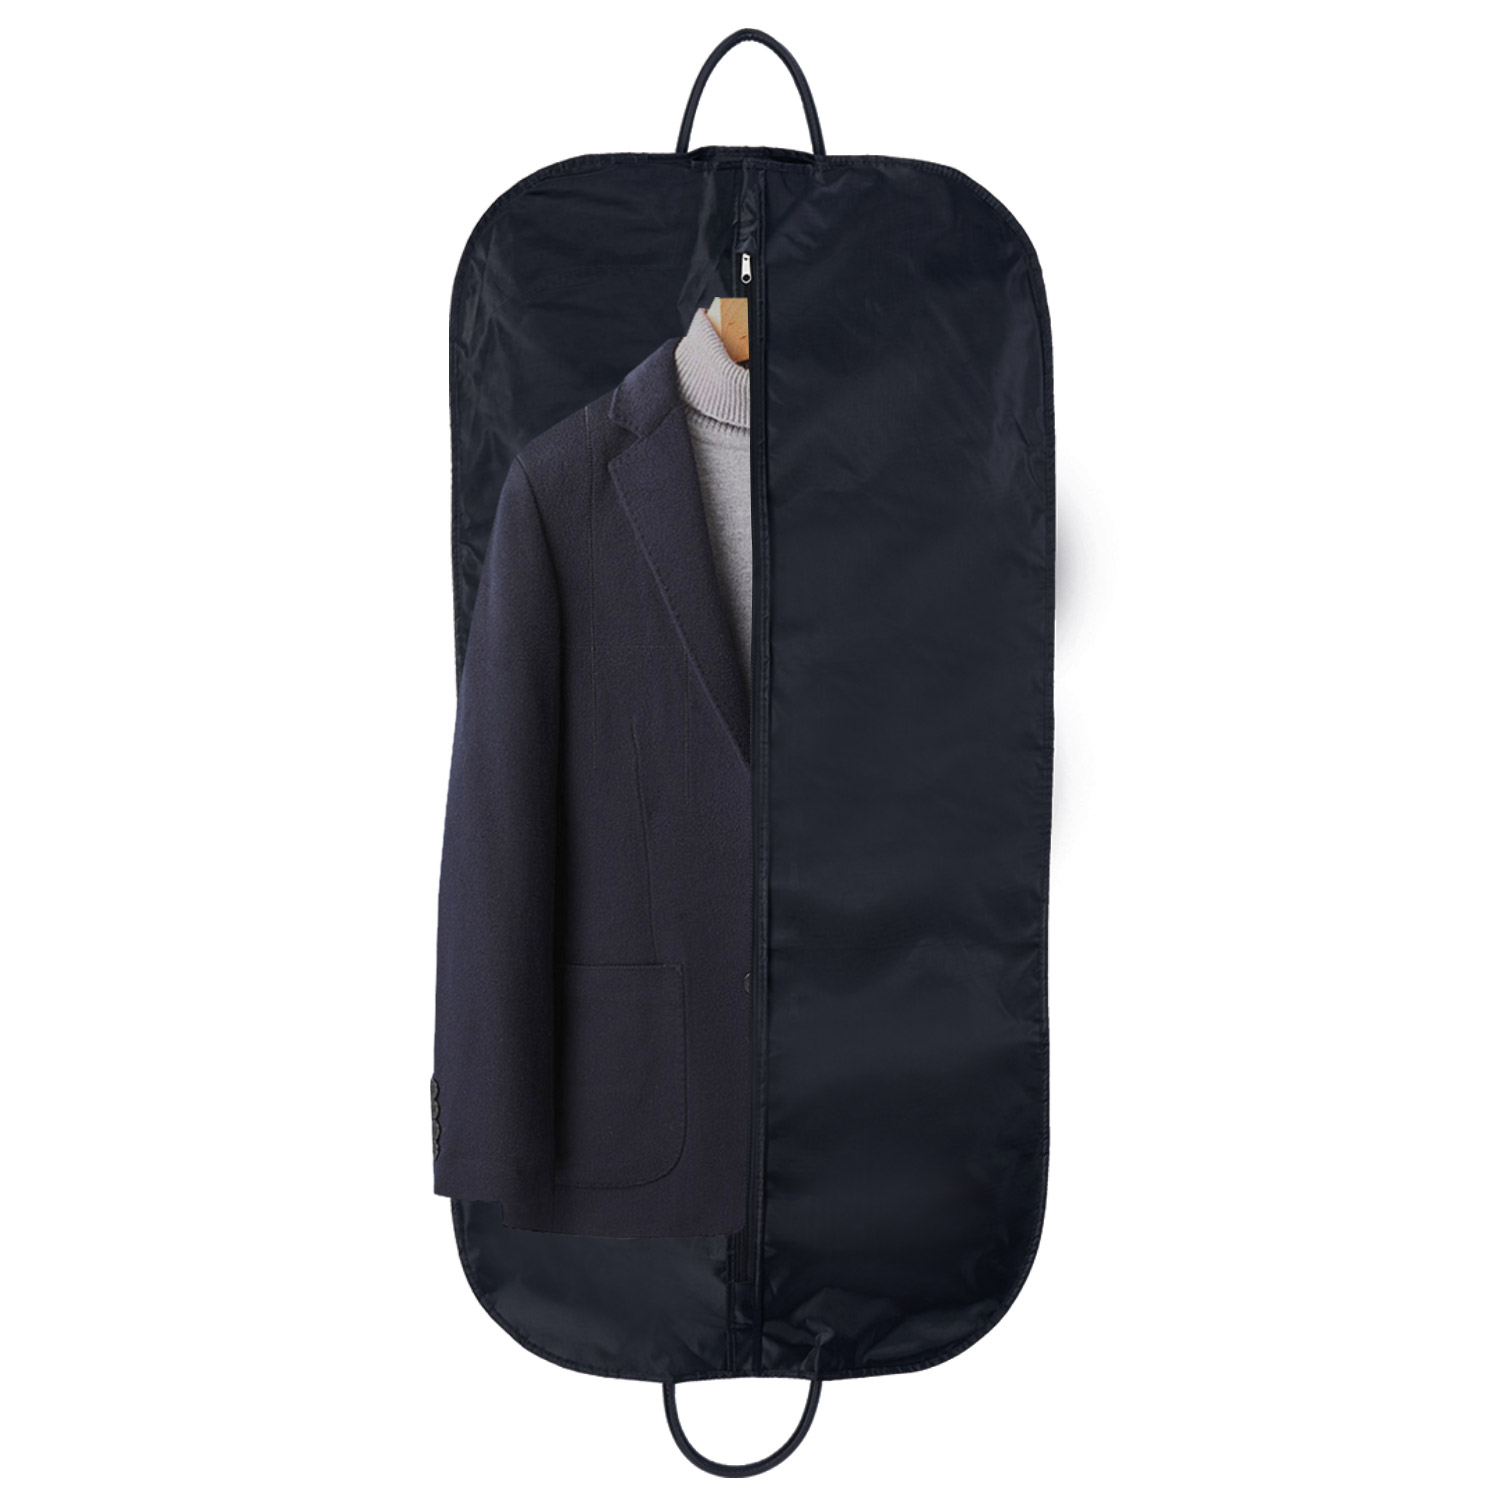 Soma Package Ltd Unveils Next Generation Garment Bag Designs with Sustainable Practices